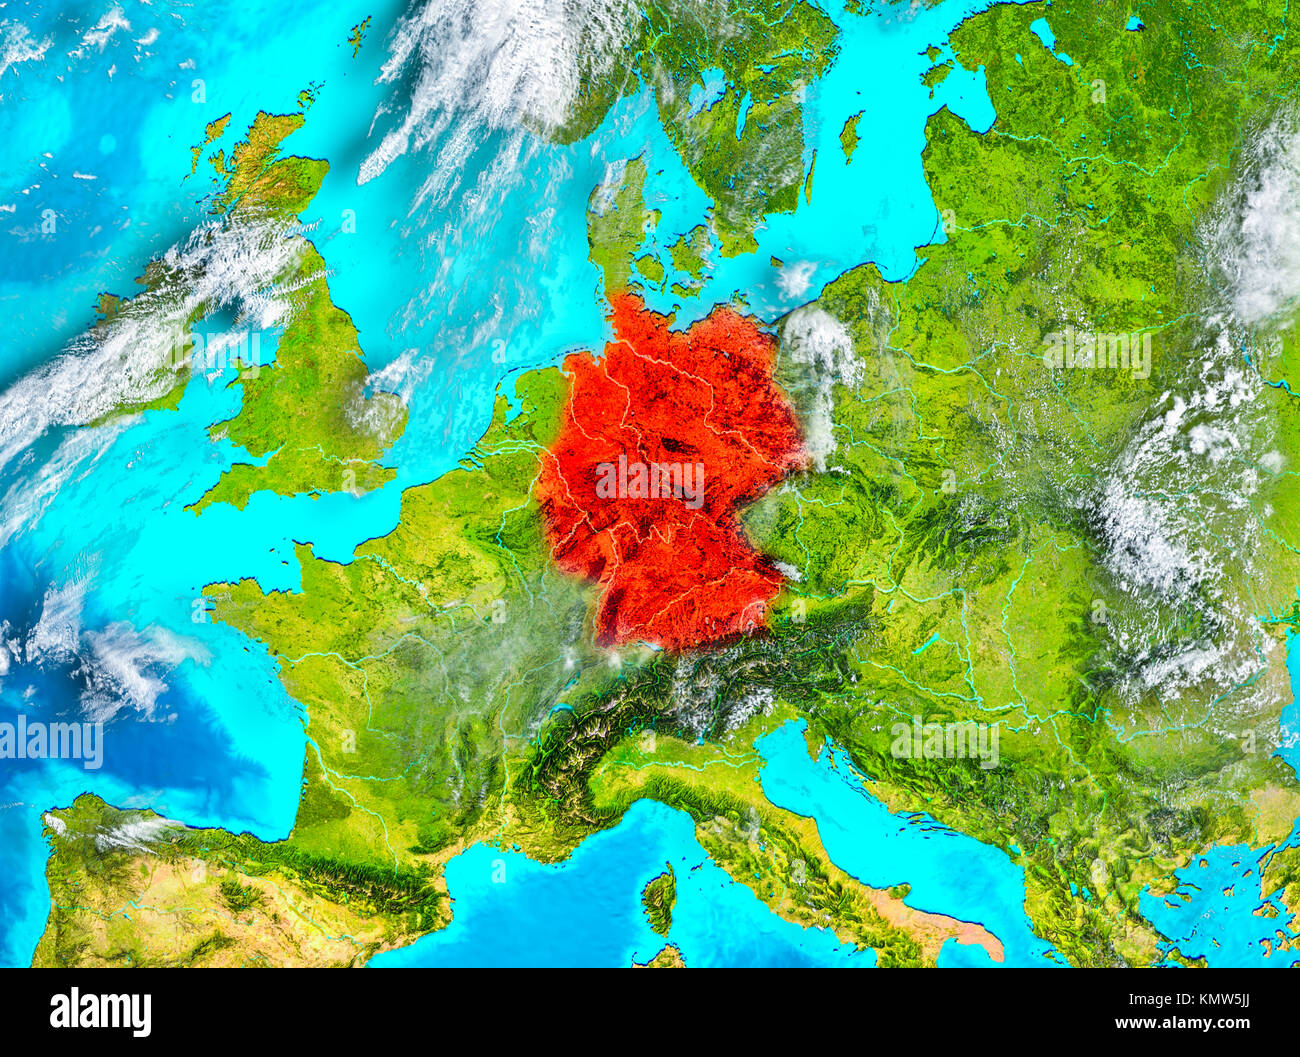 Germany highlighted in red on planet Earth. 3D illustration. Elements of this image furnished by NASA. Stock Photo